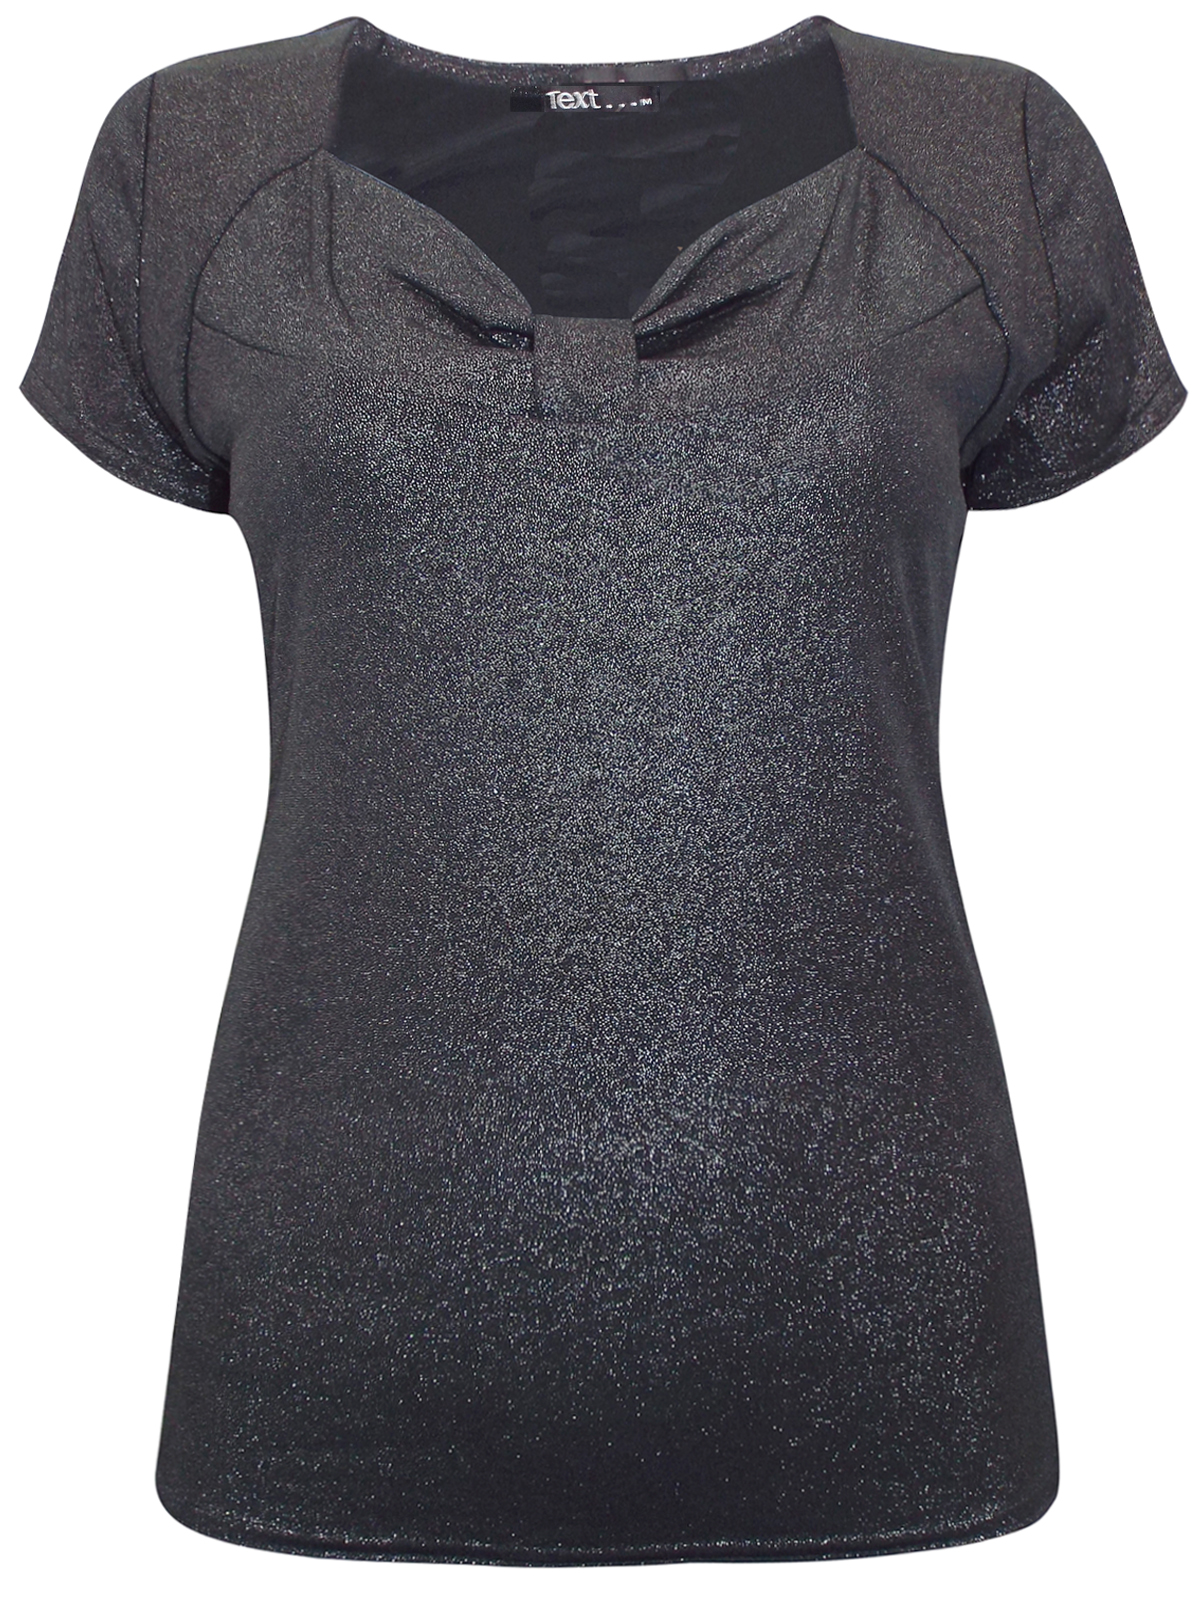 //text.. - - SILVER Metallic Tab Front Top - Size Small to XLarge